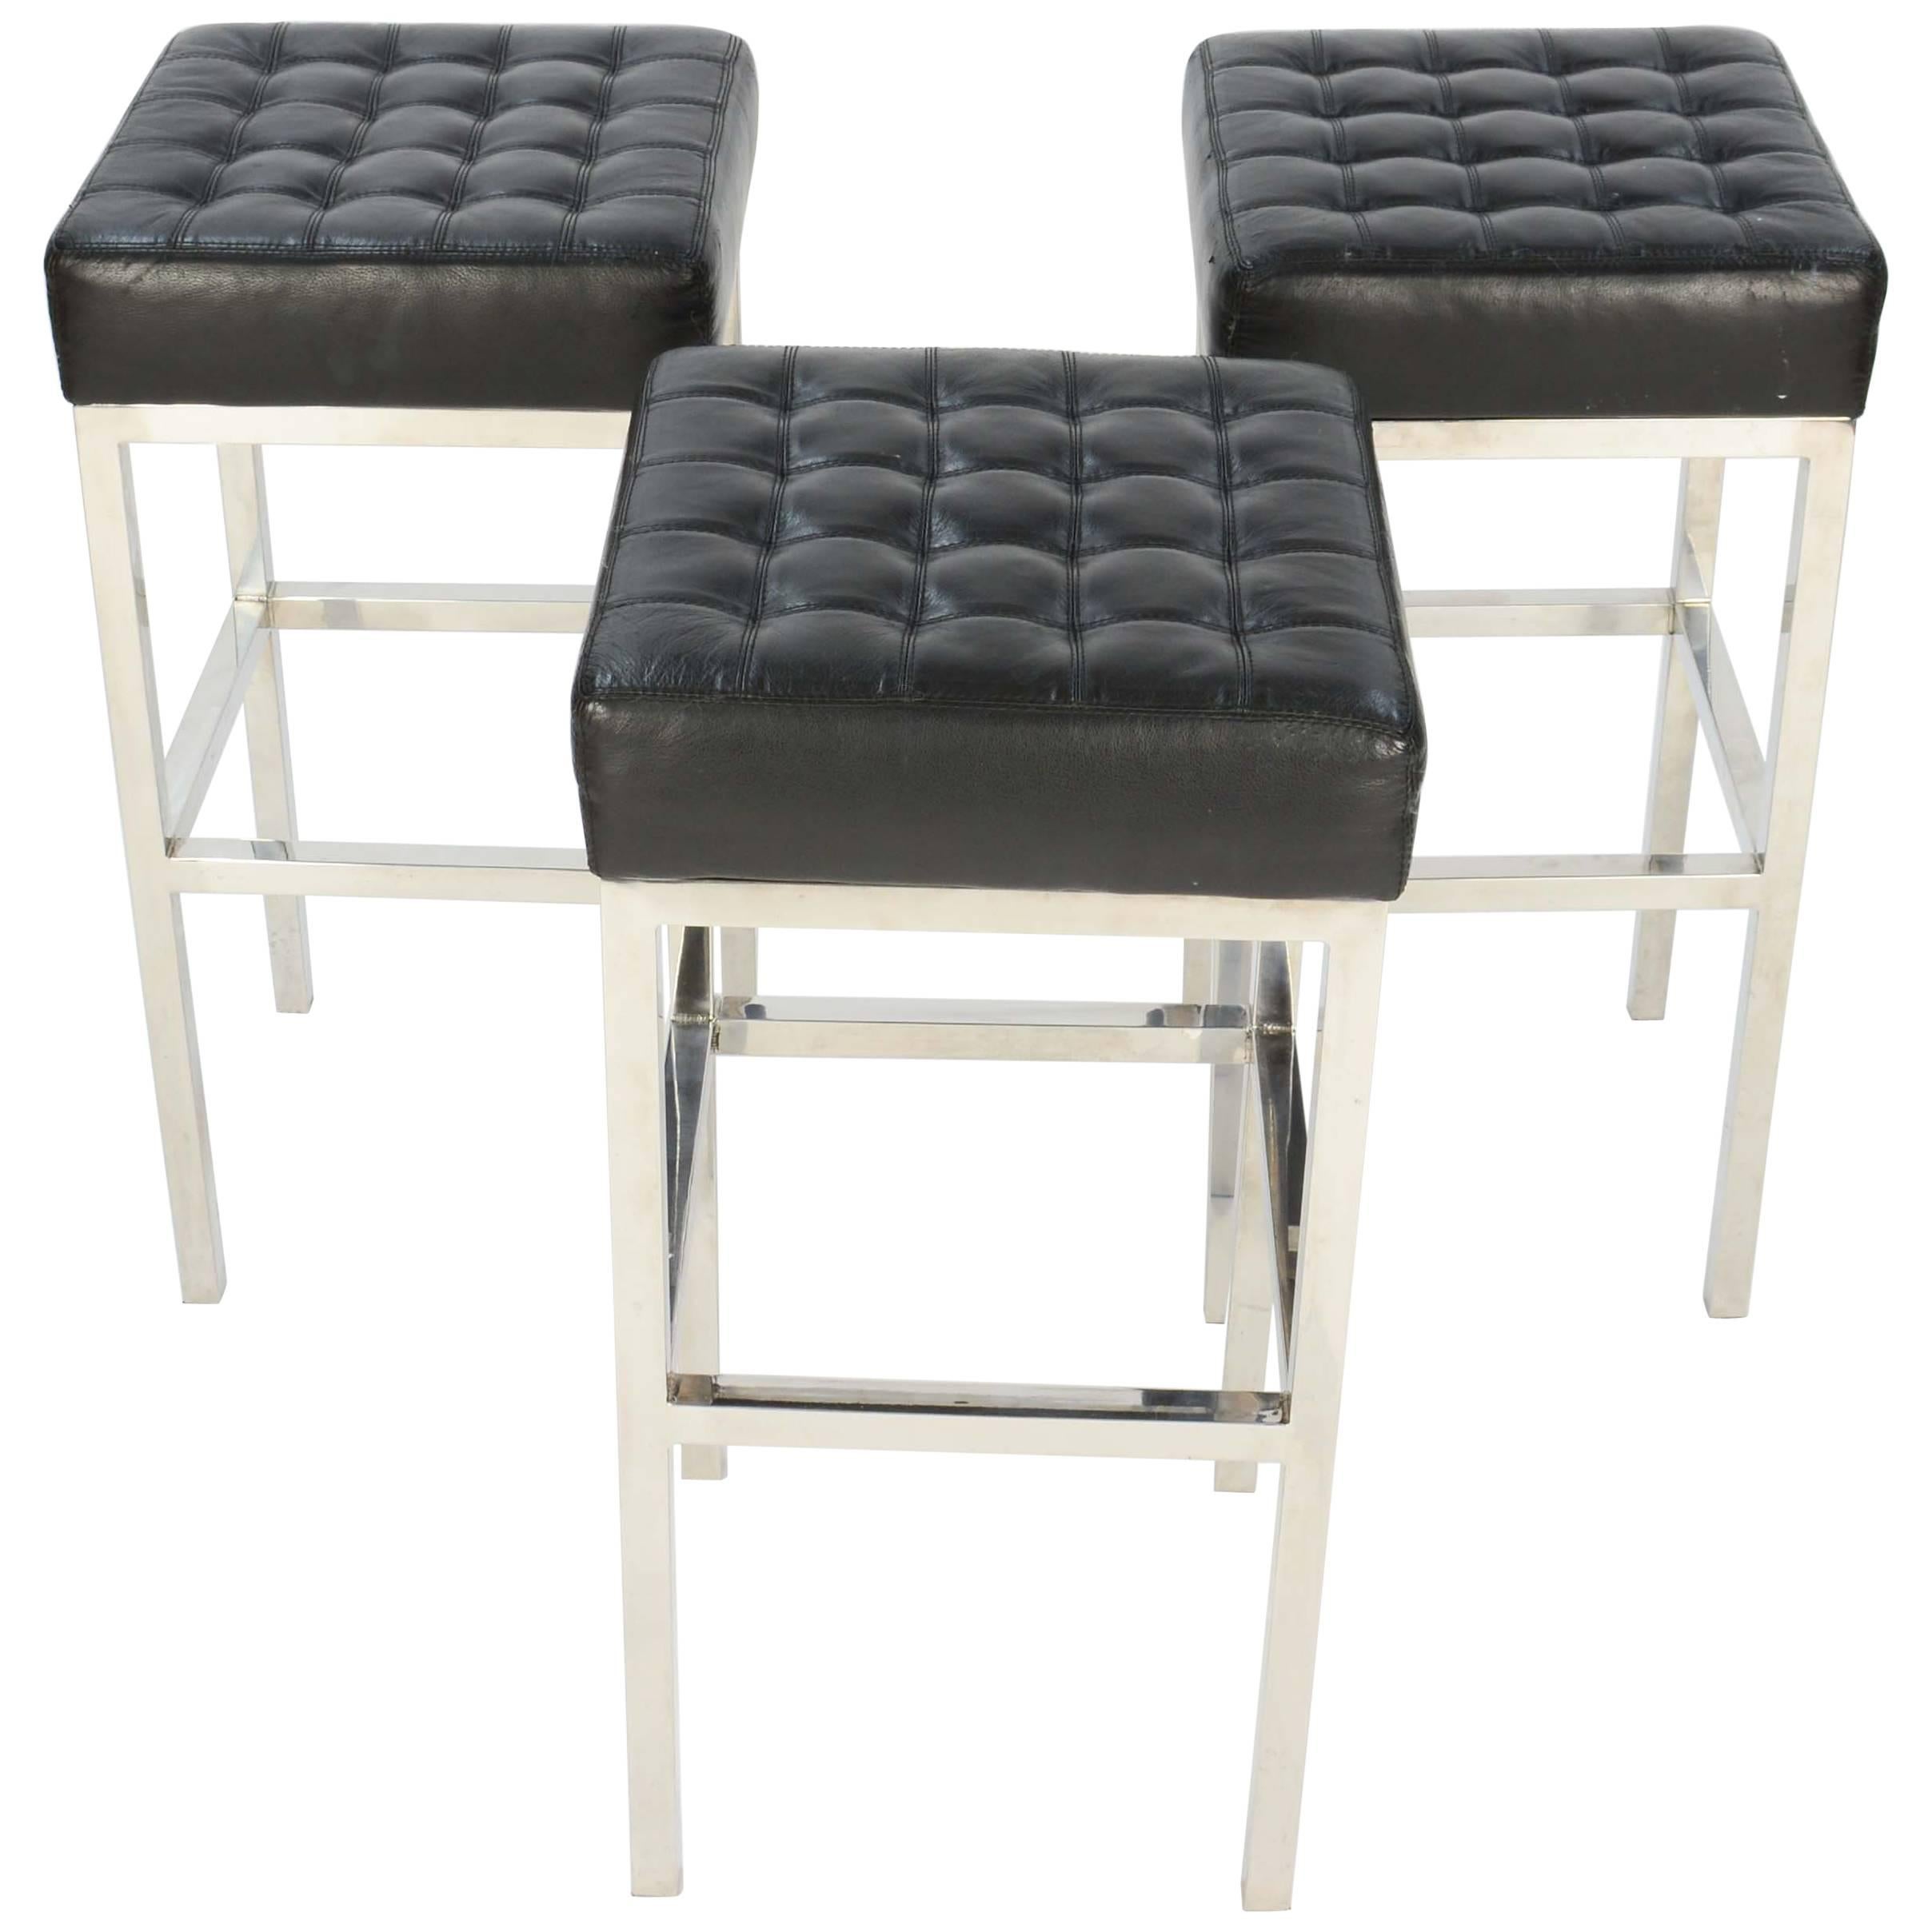 Trio of Tuffed Chrome and Leather Stools after Ludwig Mies van der Rohe